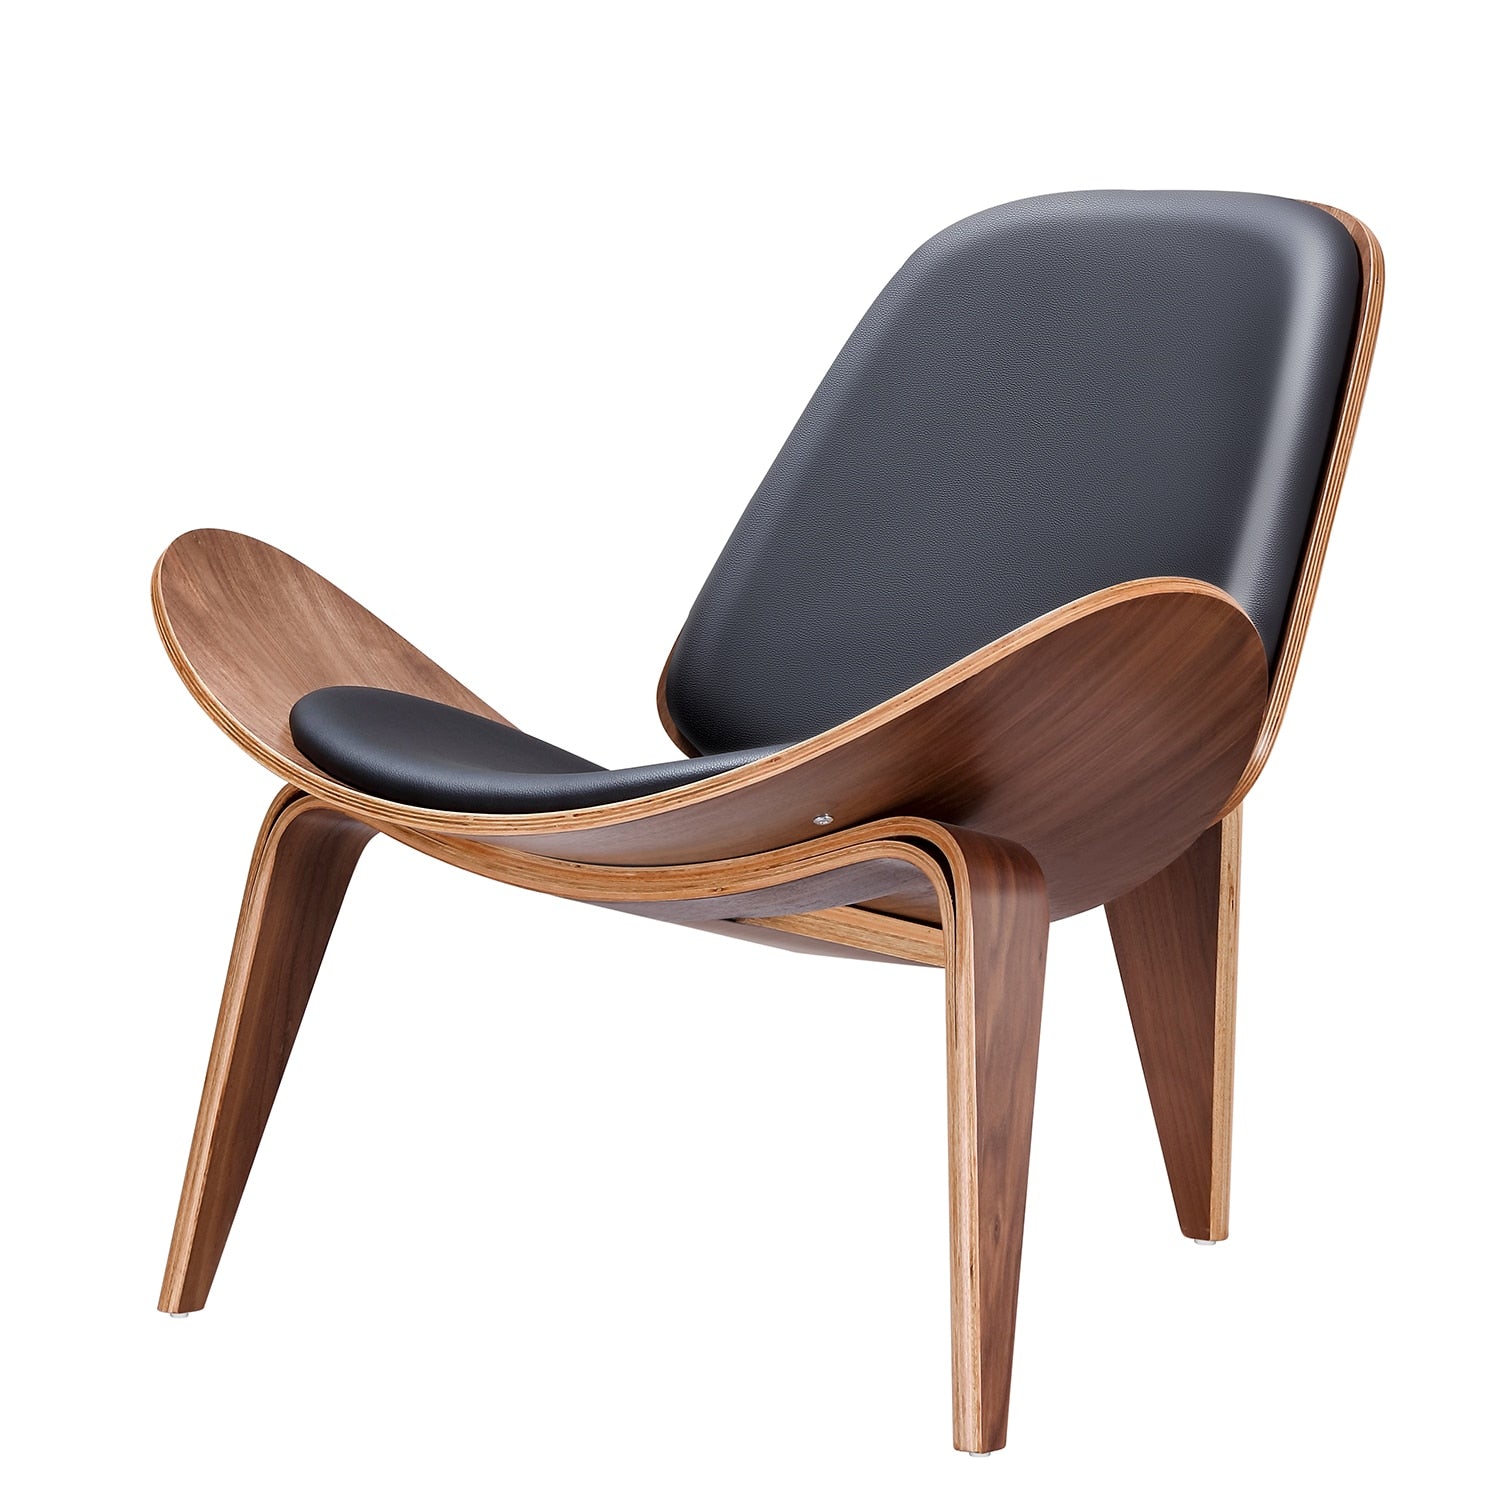 Modern lough chair. Vigore Chair made of wood and vegan leather.